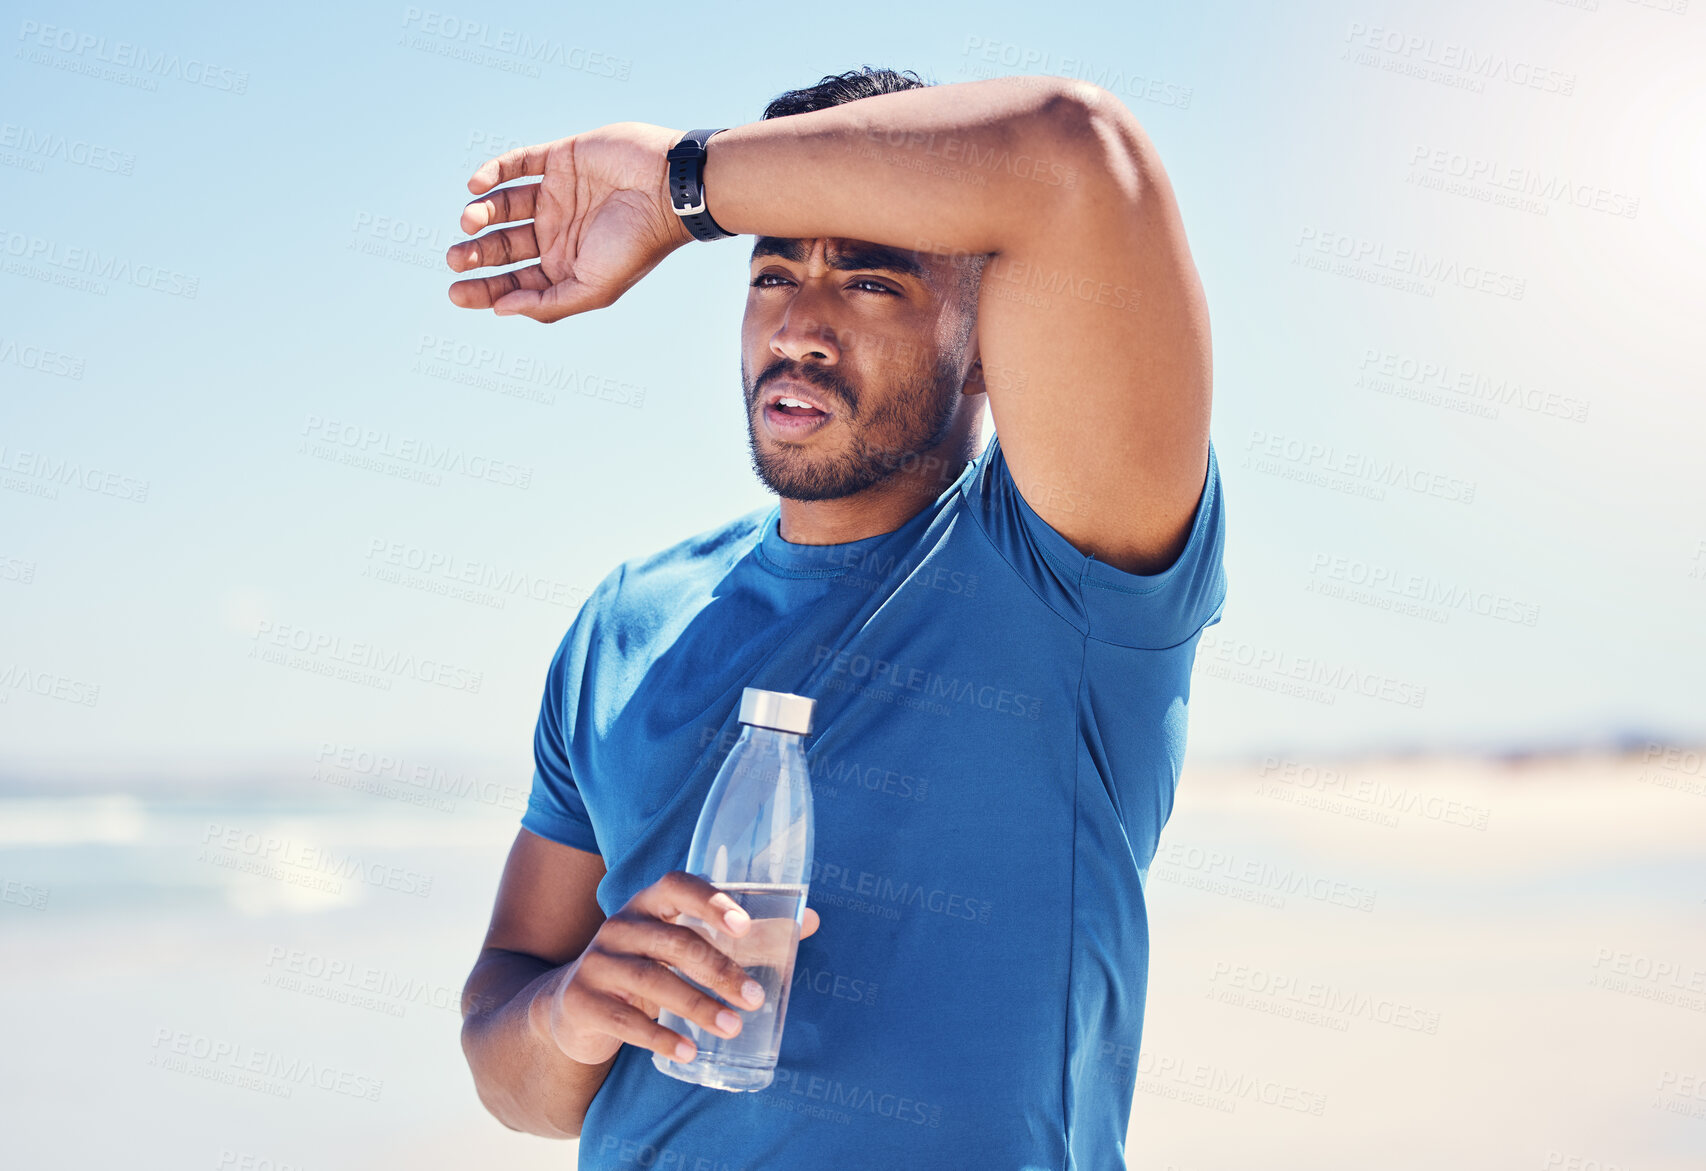 Buy stock photo Shot of a man holding a bottle water while looking exhausted during his run